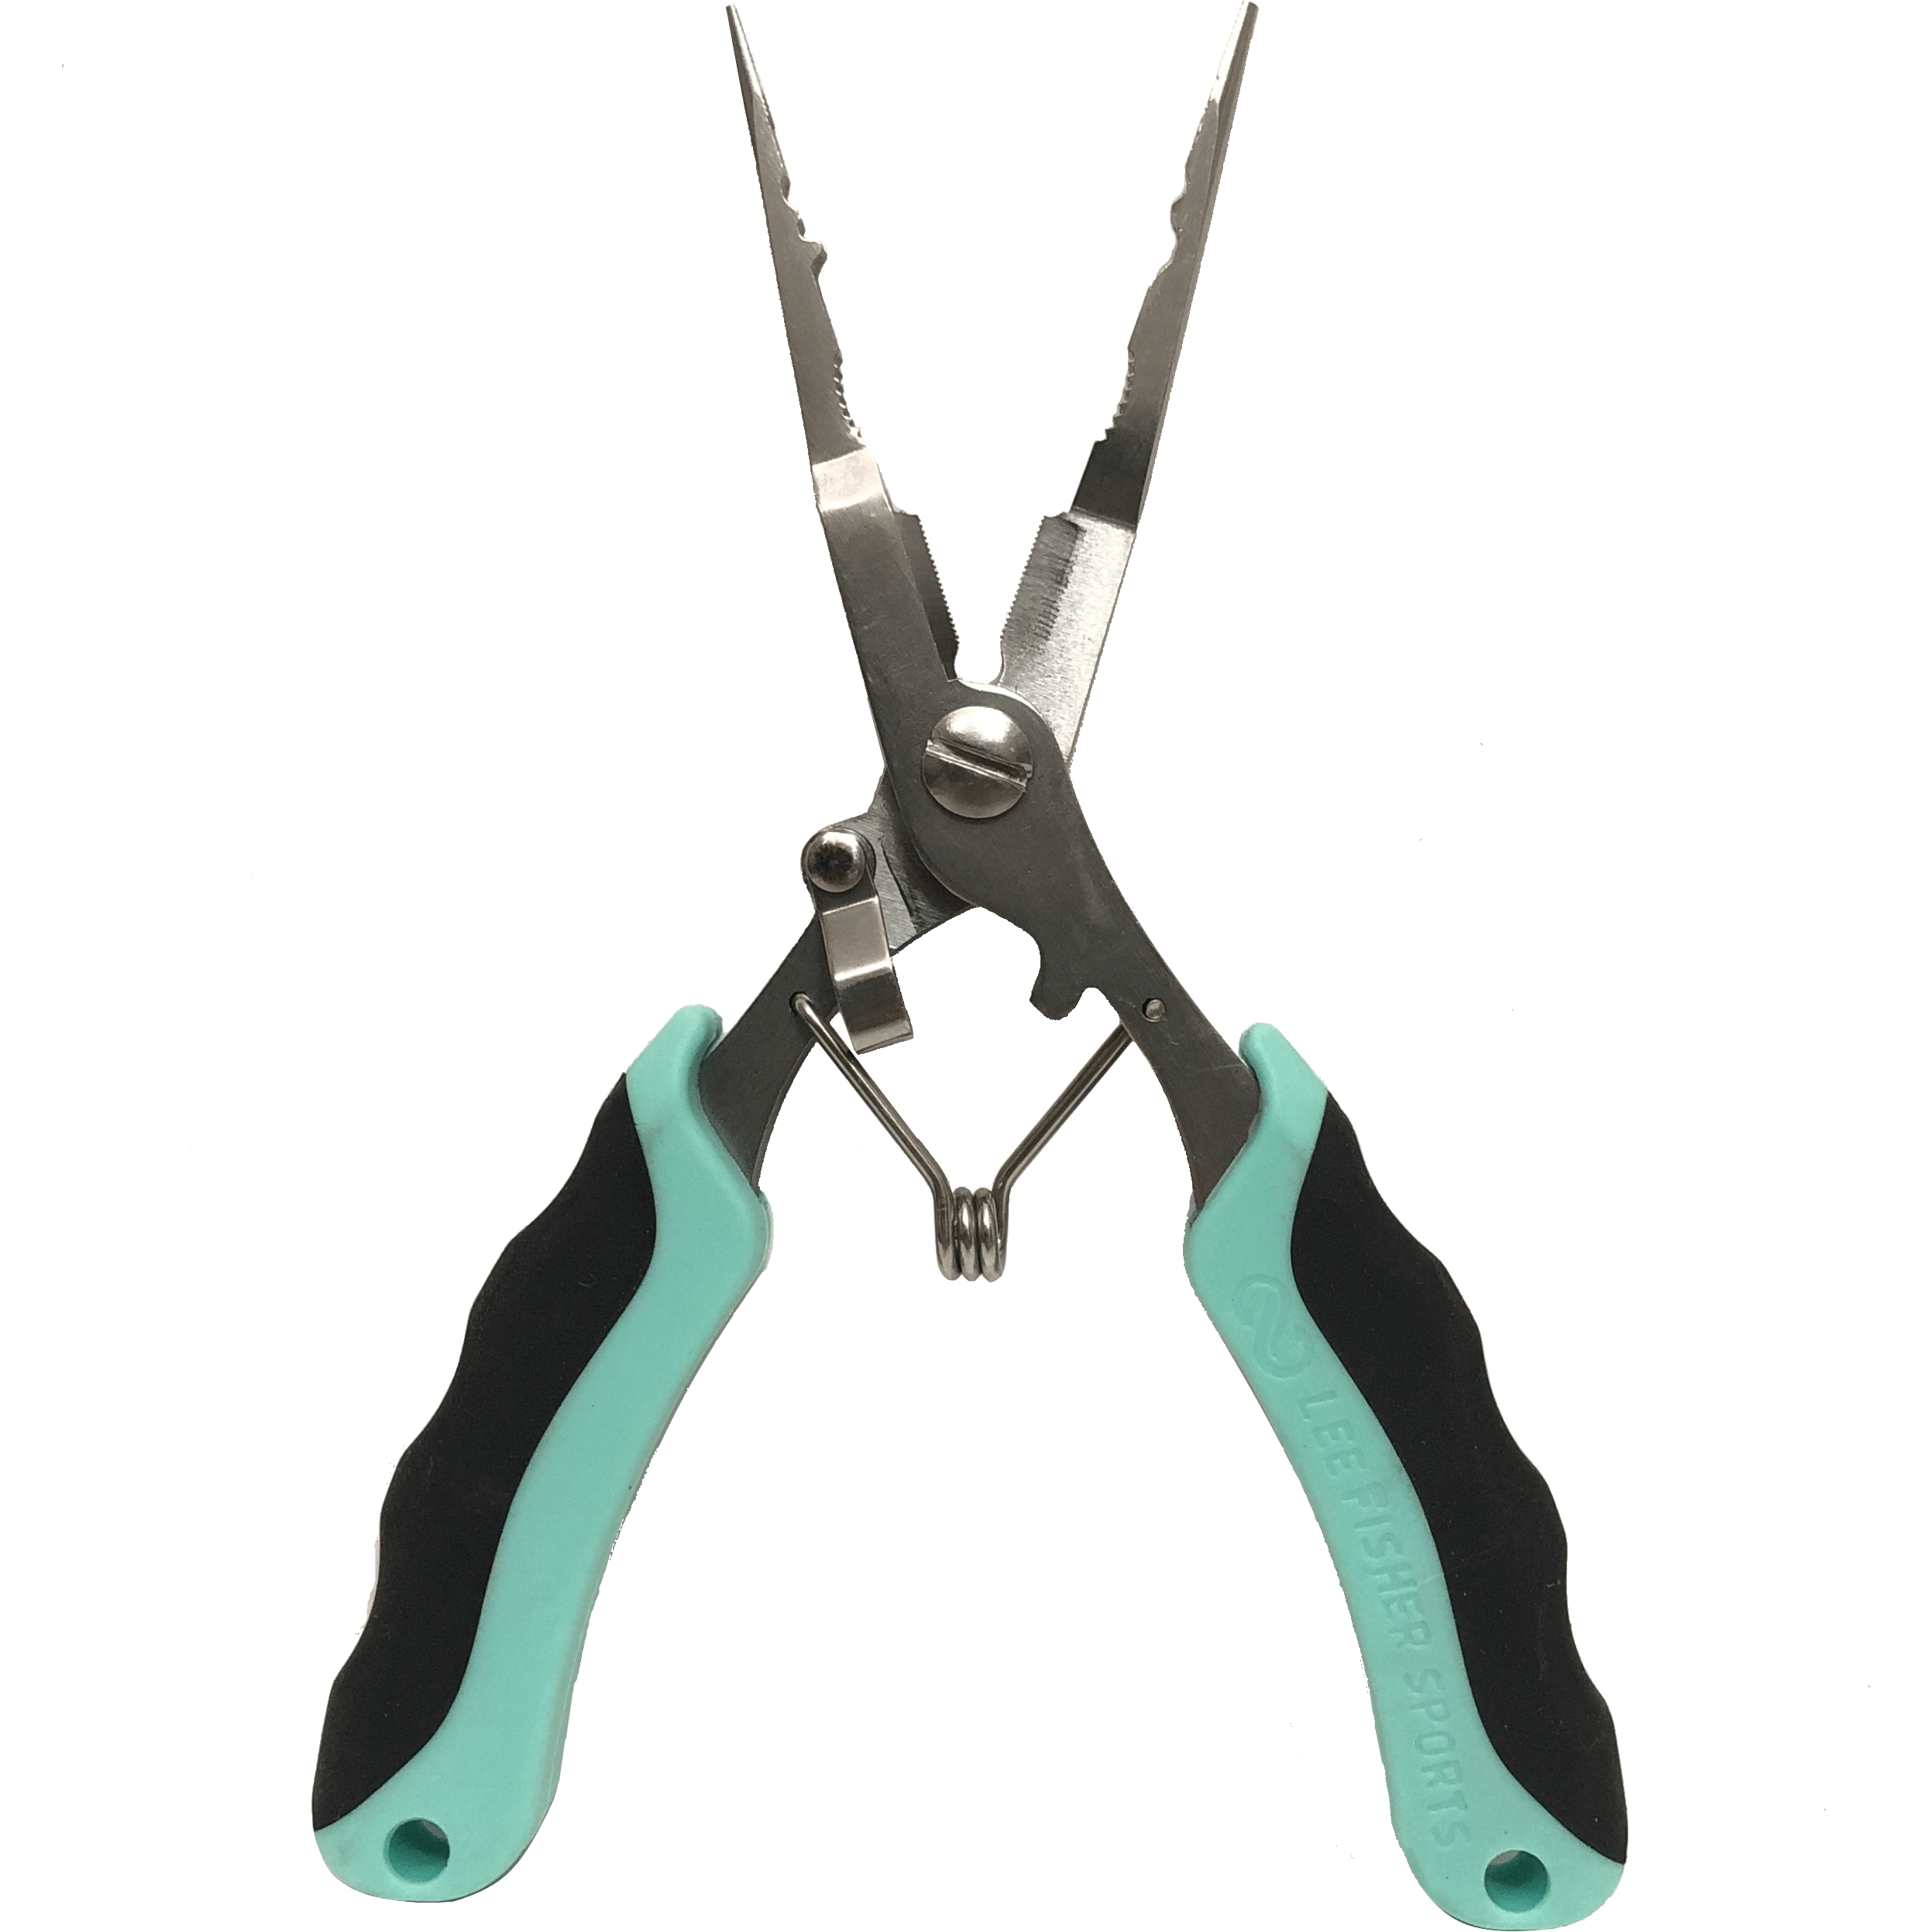 Lee Fisher Sports Plier-Multi-Use 6.5 Stainless Steel Fishing Pliers